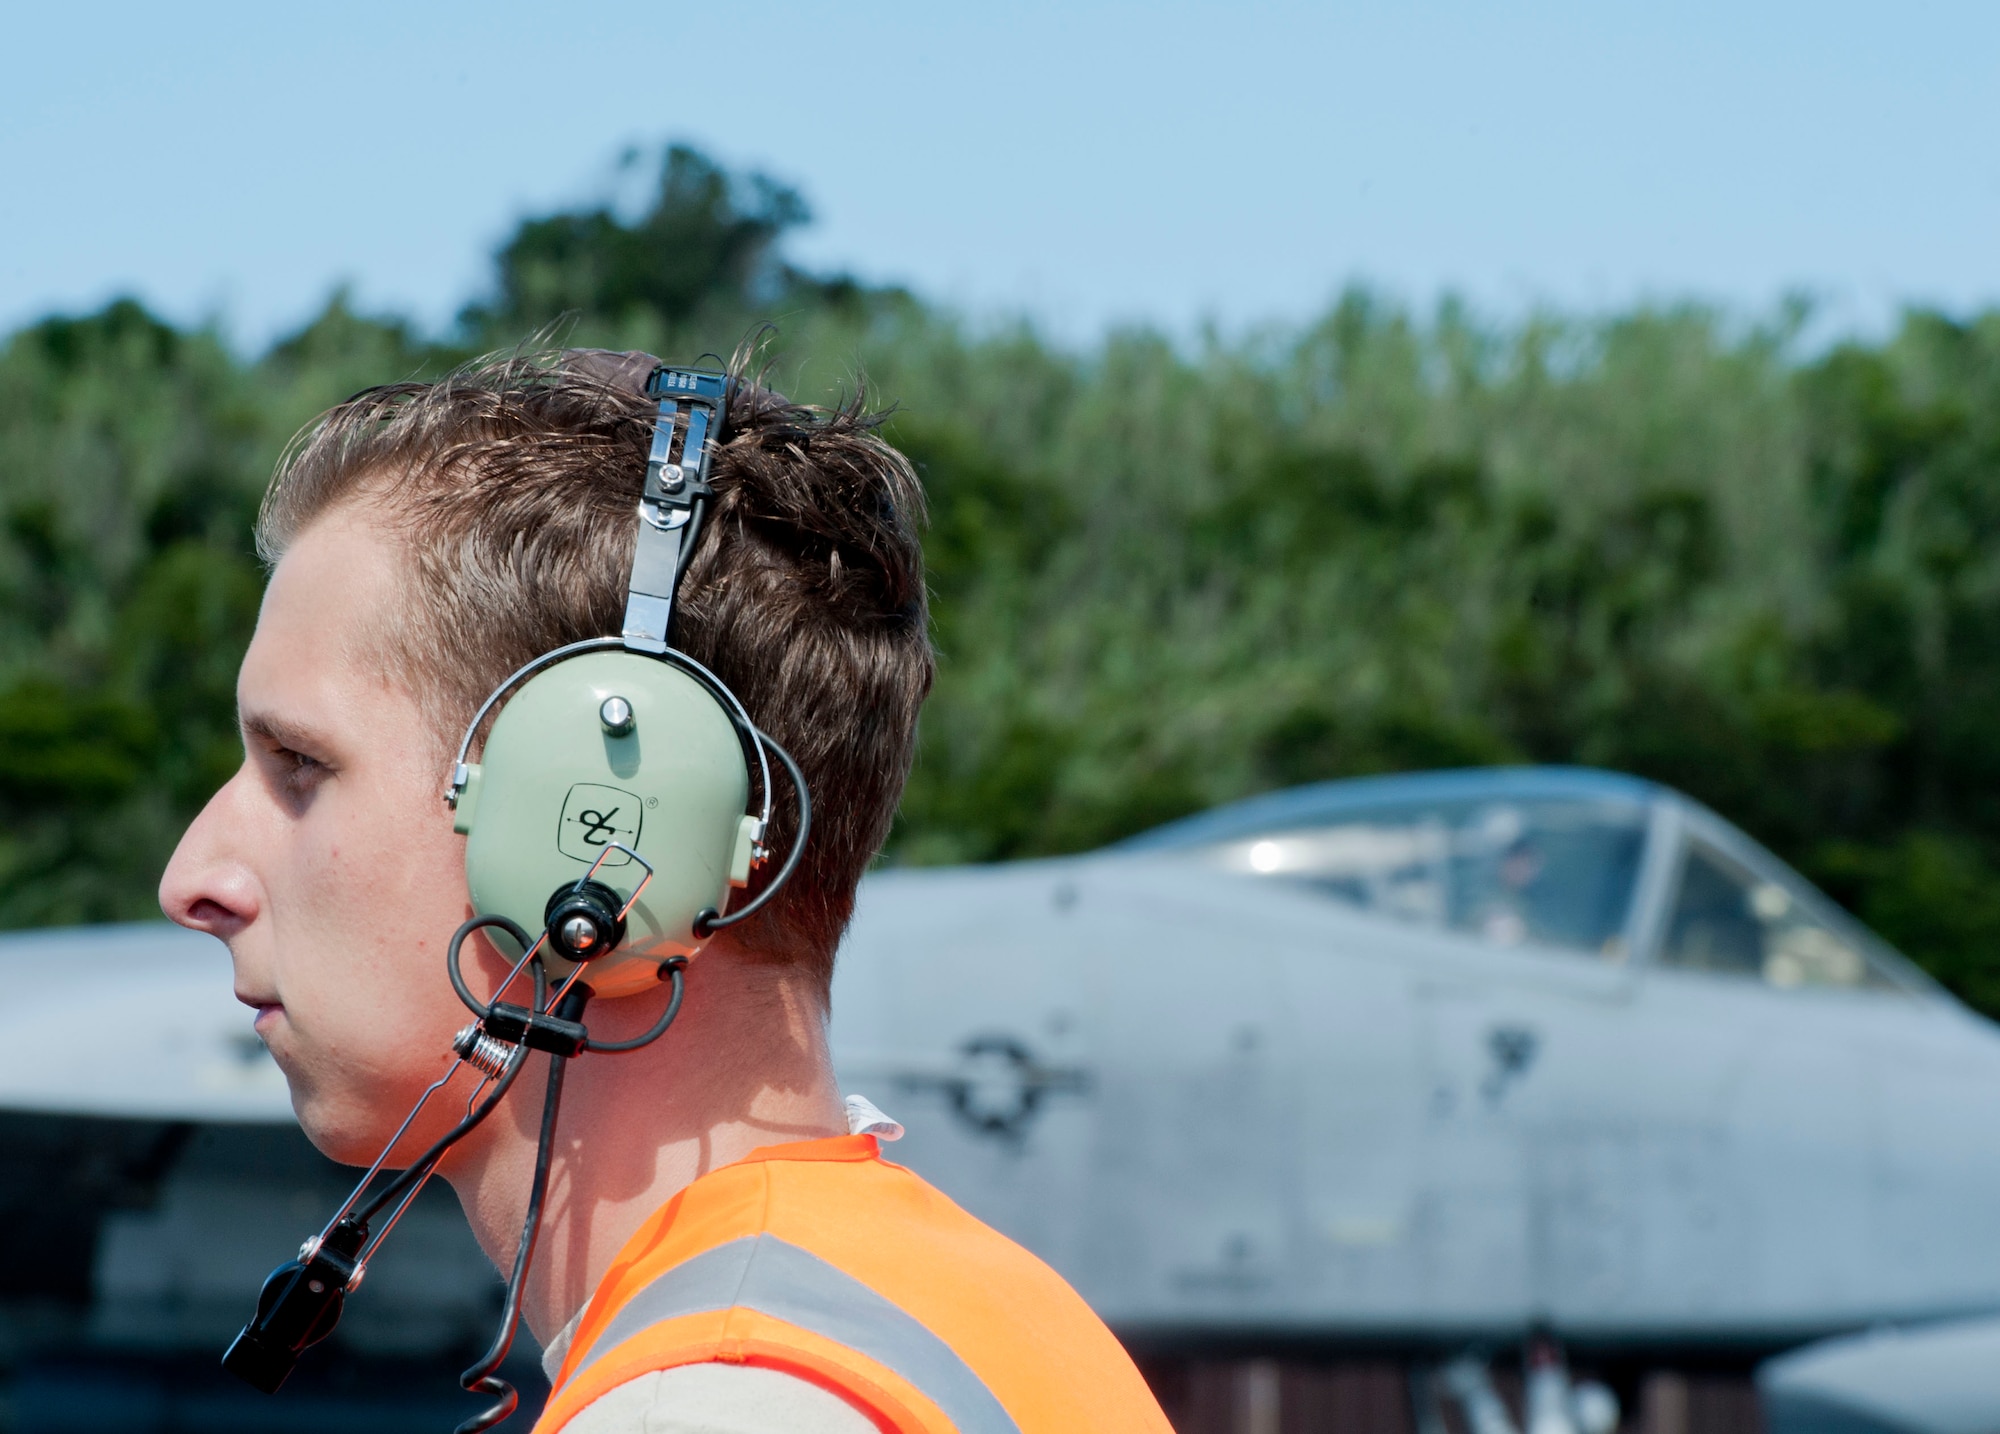 Senior Airman Samuel Clark, a 65th Operations Support Squadron transient alert maintenance technician, prepares to marshall in an A-10 Thunderbolt II on Lajes Field, Azores, Portugal, August 1, 2015. The 354th Expeditionary Fighter Squadron returns home after deploying 12 A-10s as part of a Theater Security Package in support of Operation Atlantic Resolve, to Spangdahlem AB, Germany where they conducted training alongside our NATO allies to strengthen interoperability and to demonstrate U.S. commitment to the security and stability of Europe. (U.S. Air Force photo by Master Sgt. Bradley C. Church).